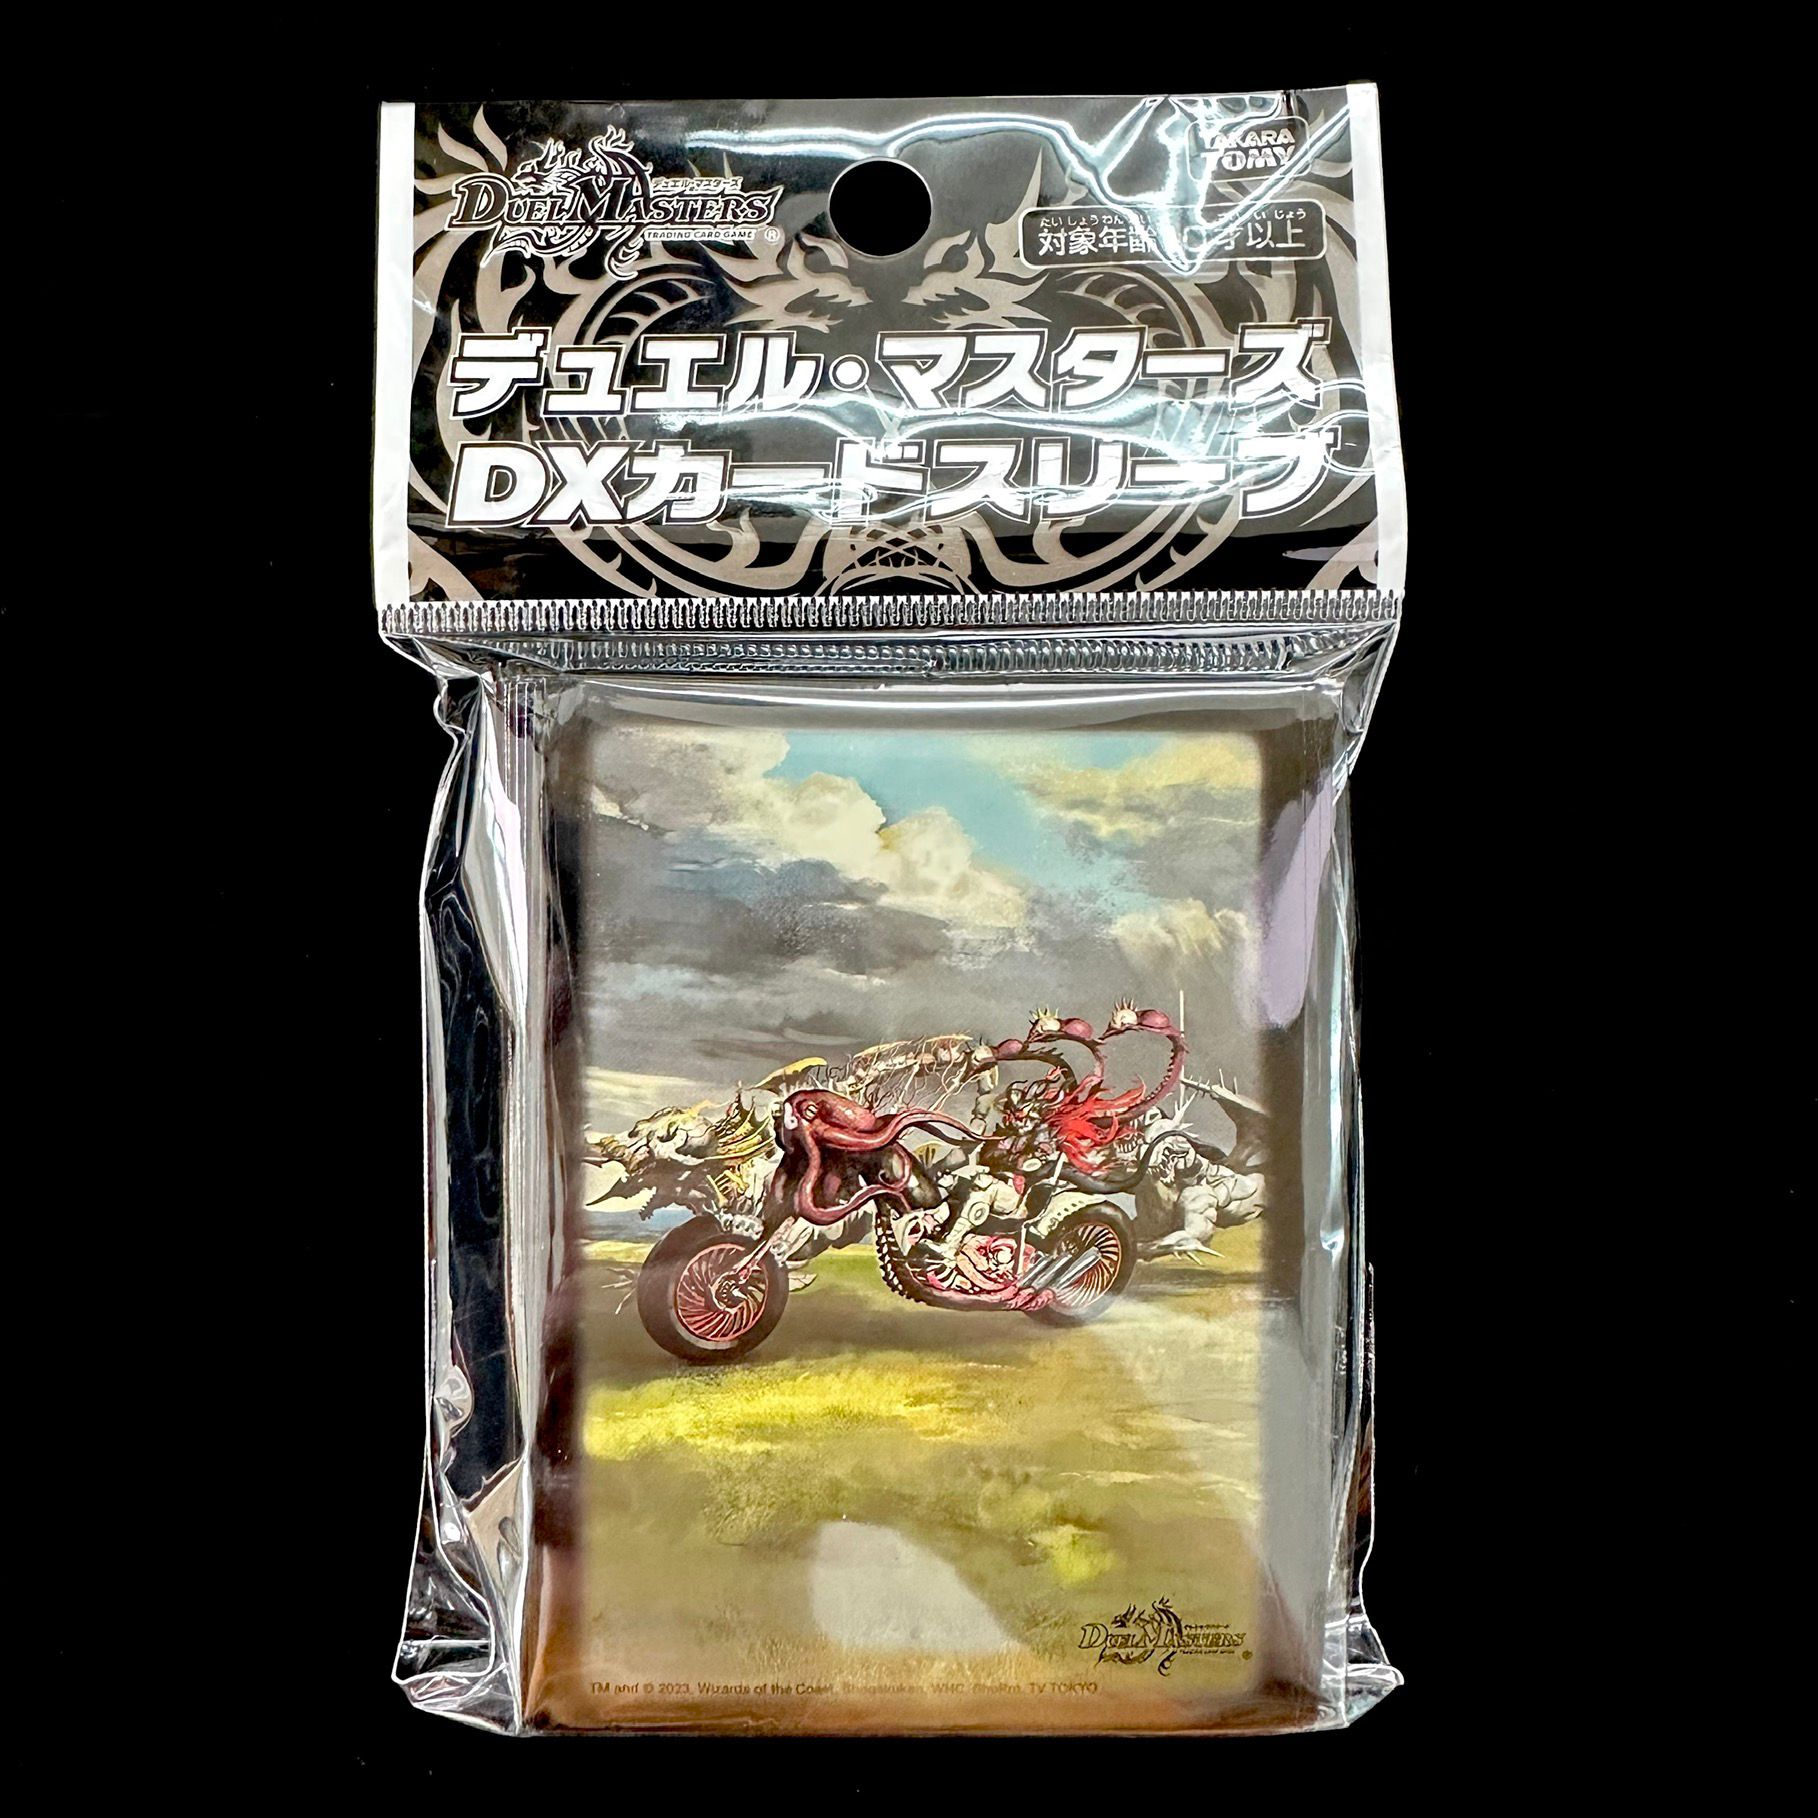 DUEL MASTERS DX Card Sleeve アビスベル＝覇＝ロード シークレットSPレアver.